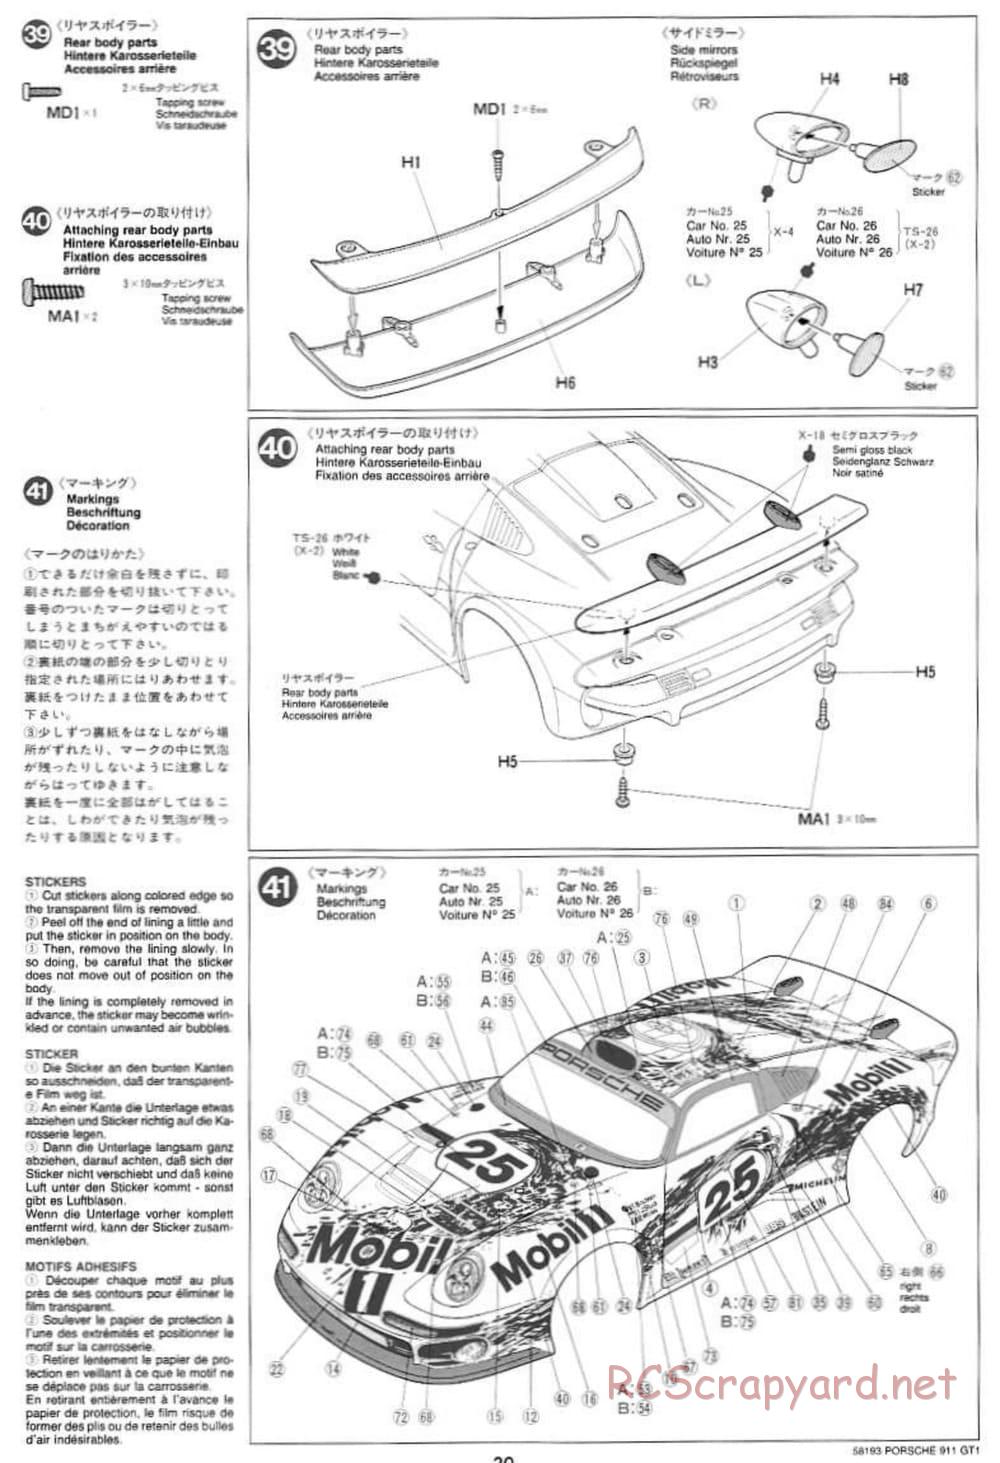 Tamiya - Porsche 911 GT1 - TA-03RS Chassis - Manual - Page 20